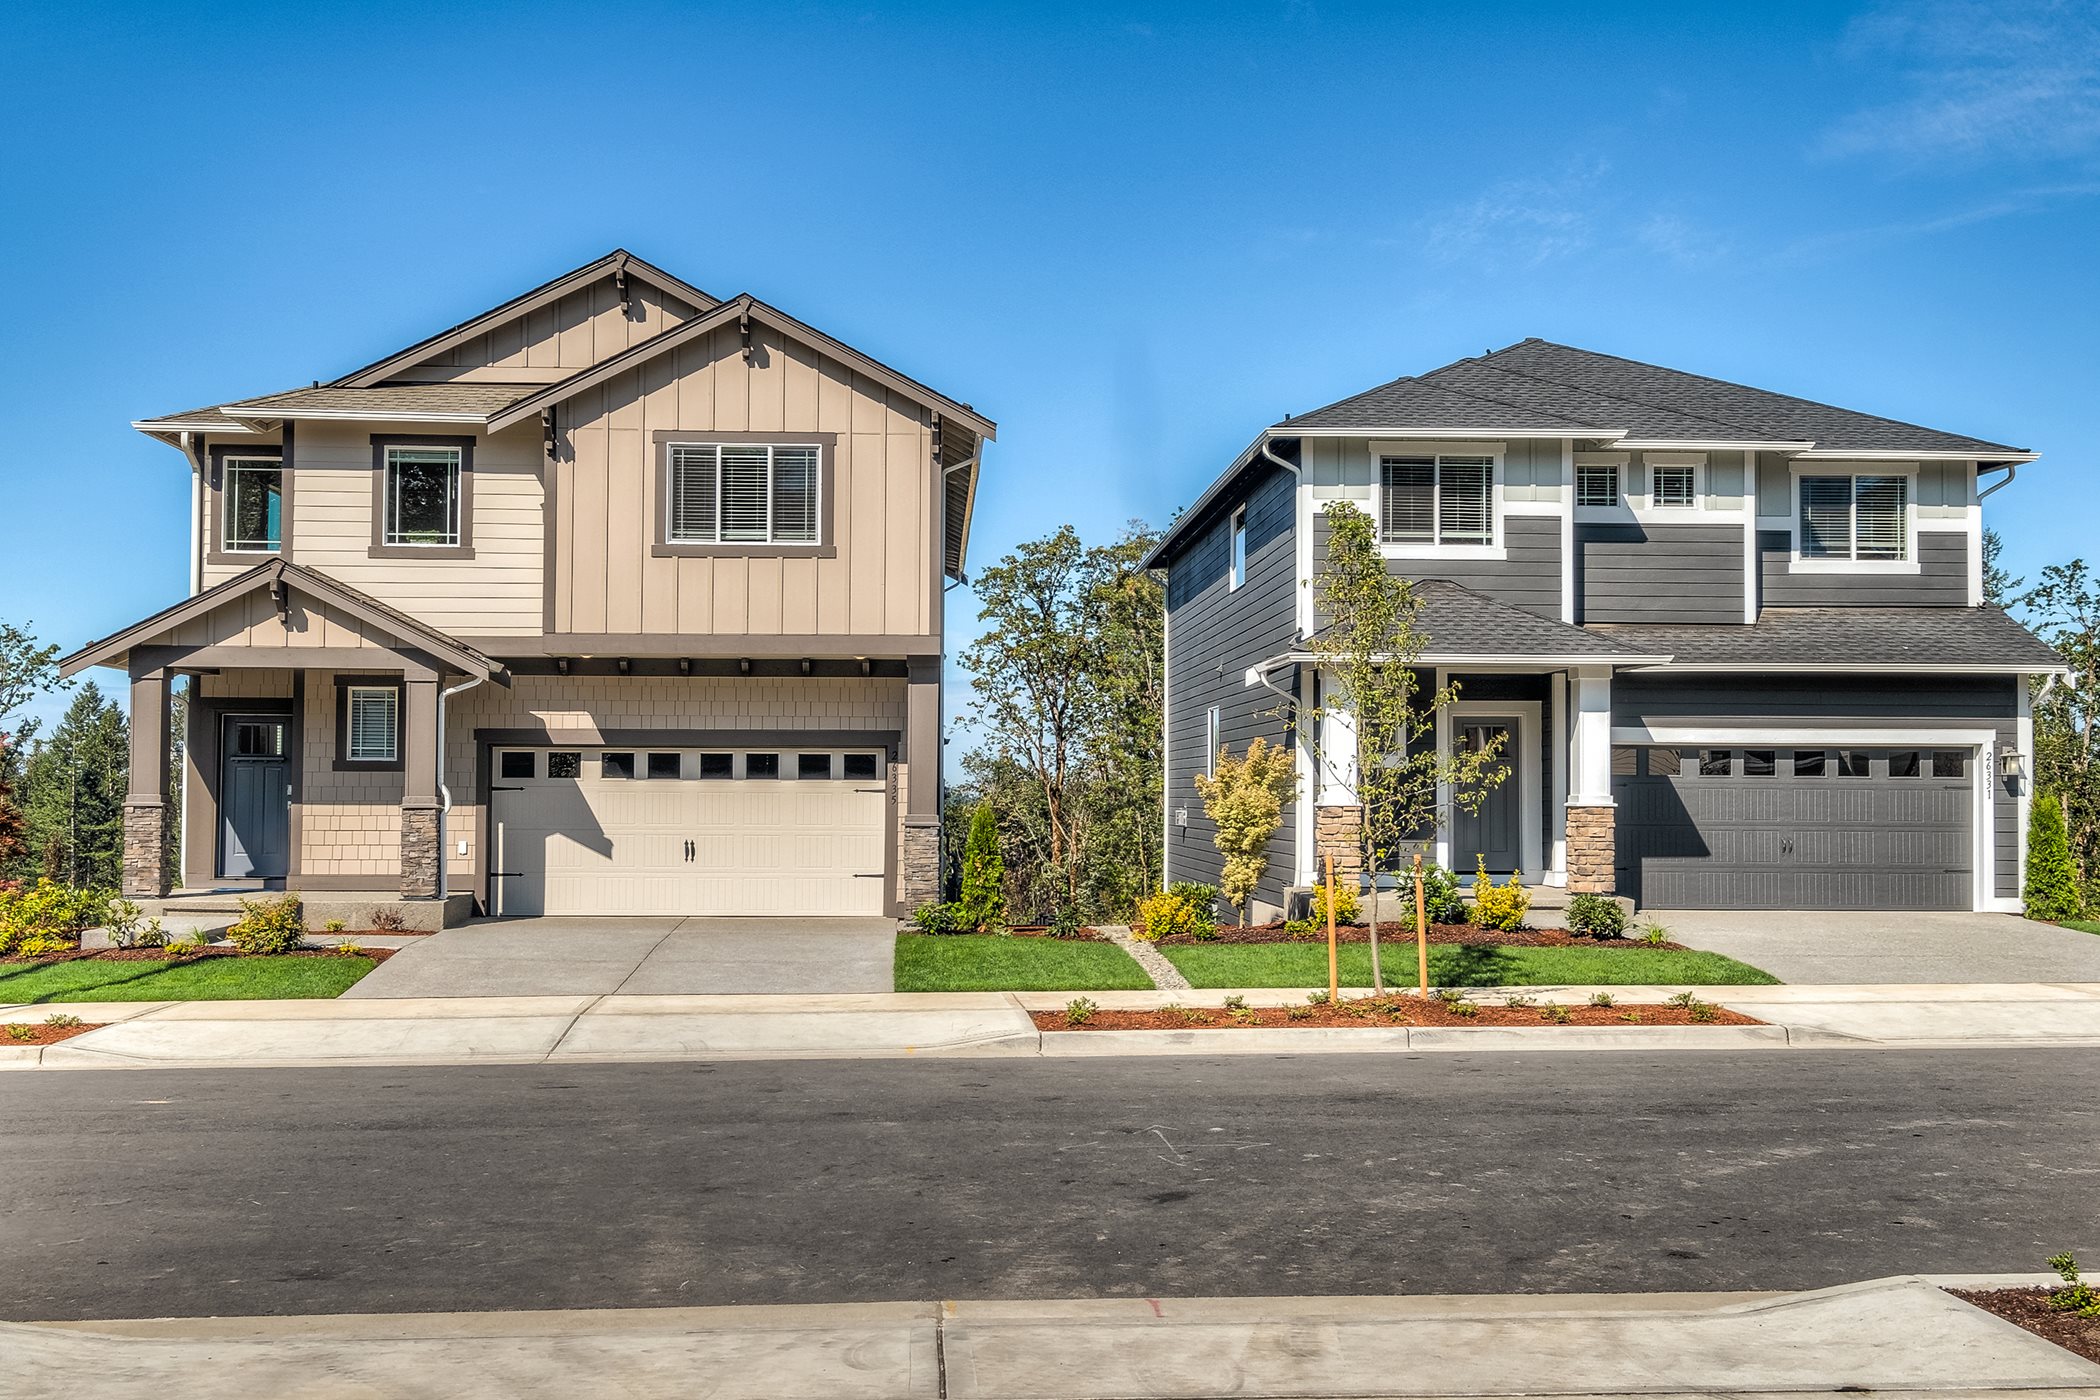 New homes for sale in Bothell, New homes for sale in Lake Stevens, New homes for sale in Sultan